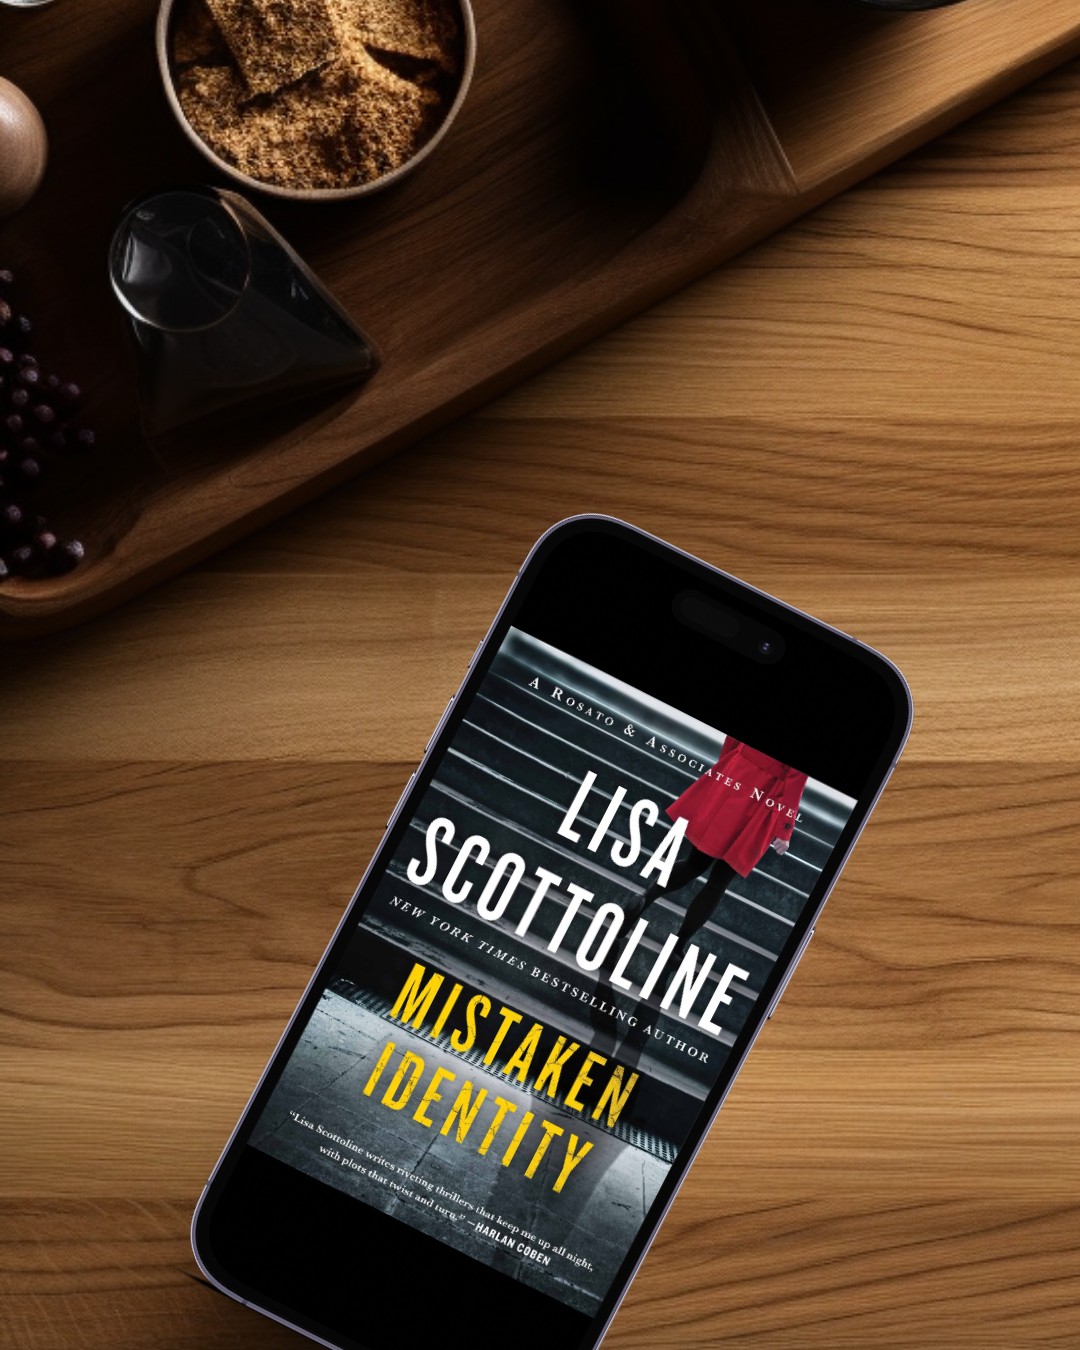 If you're a fan of legal thrillers, you won't want to miss Mistaken Identity by Lisa Scottoline. Our review dives into the twists and turns of this suspenseful novel.